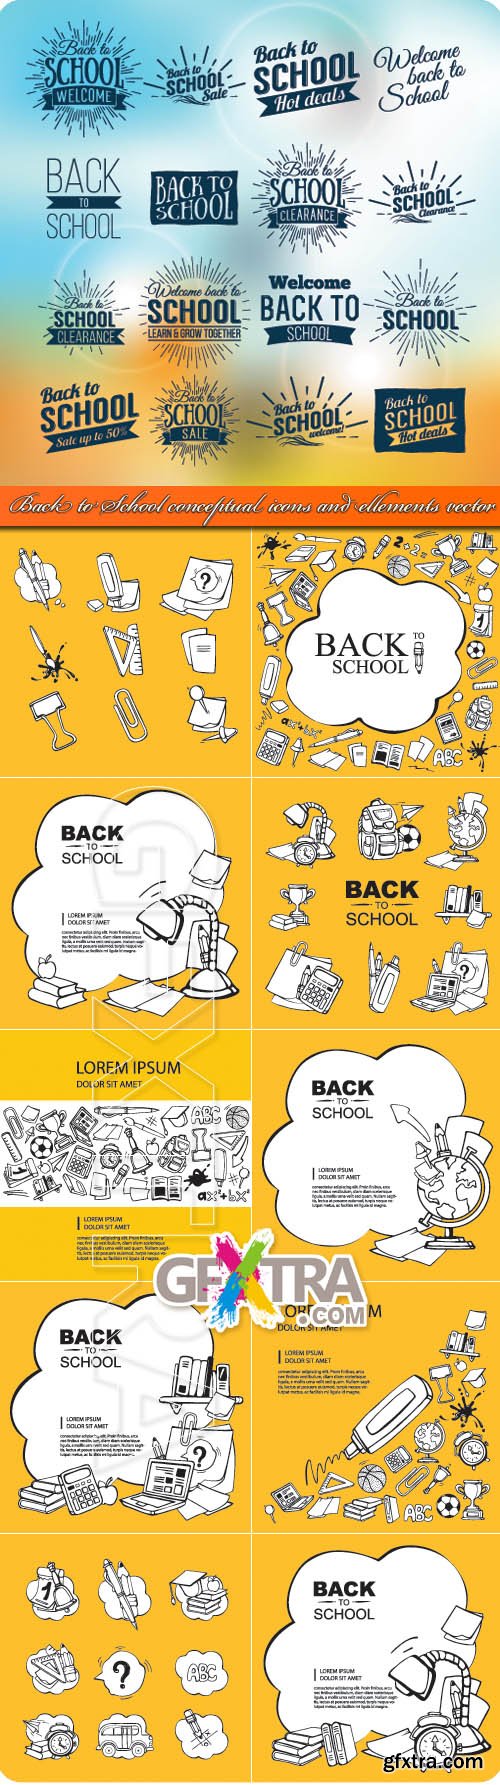 Back to School conceptual icons and elements vector